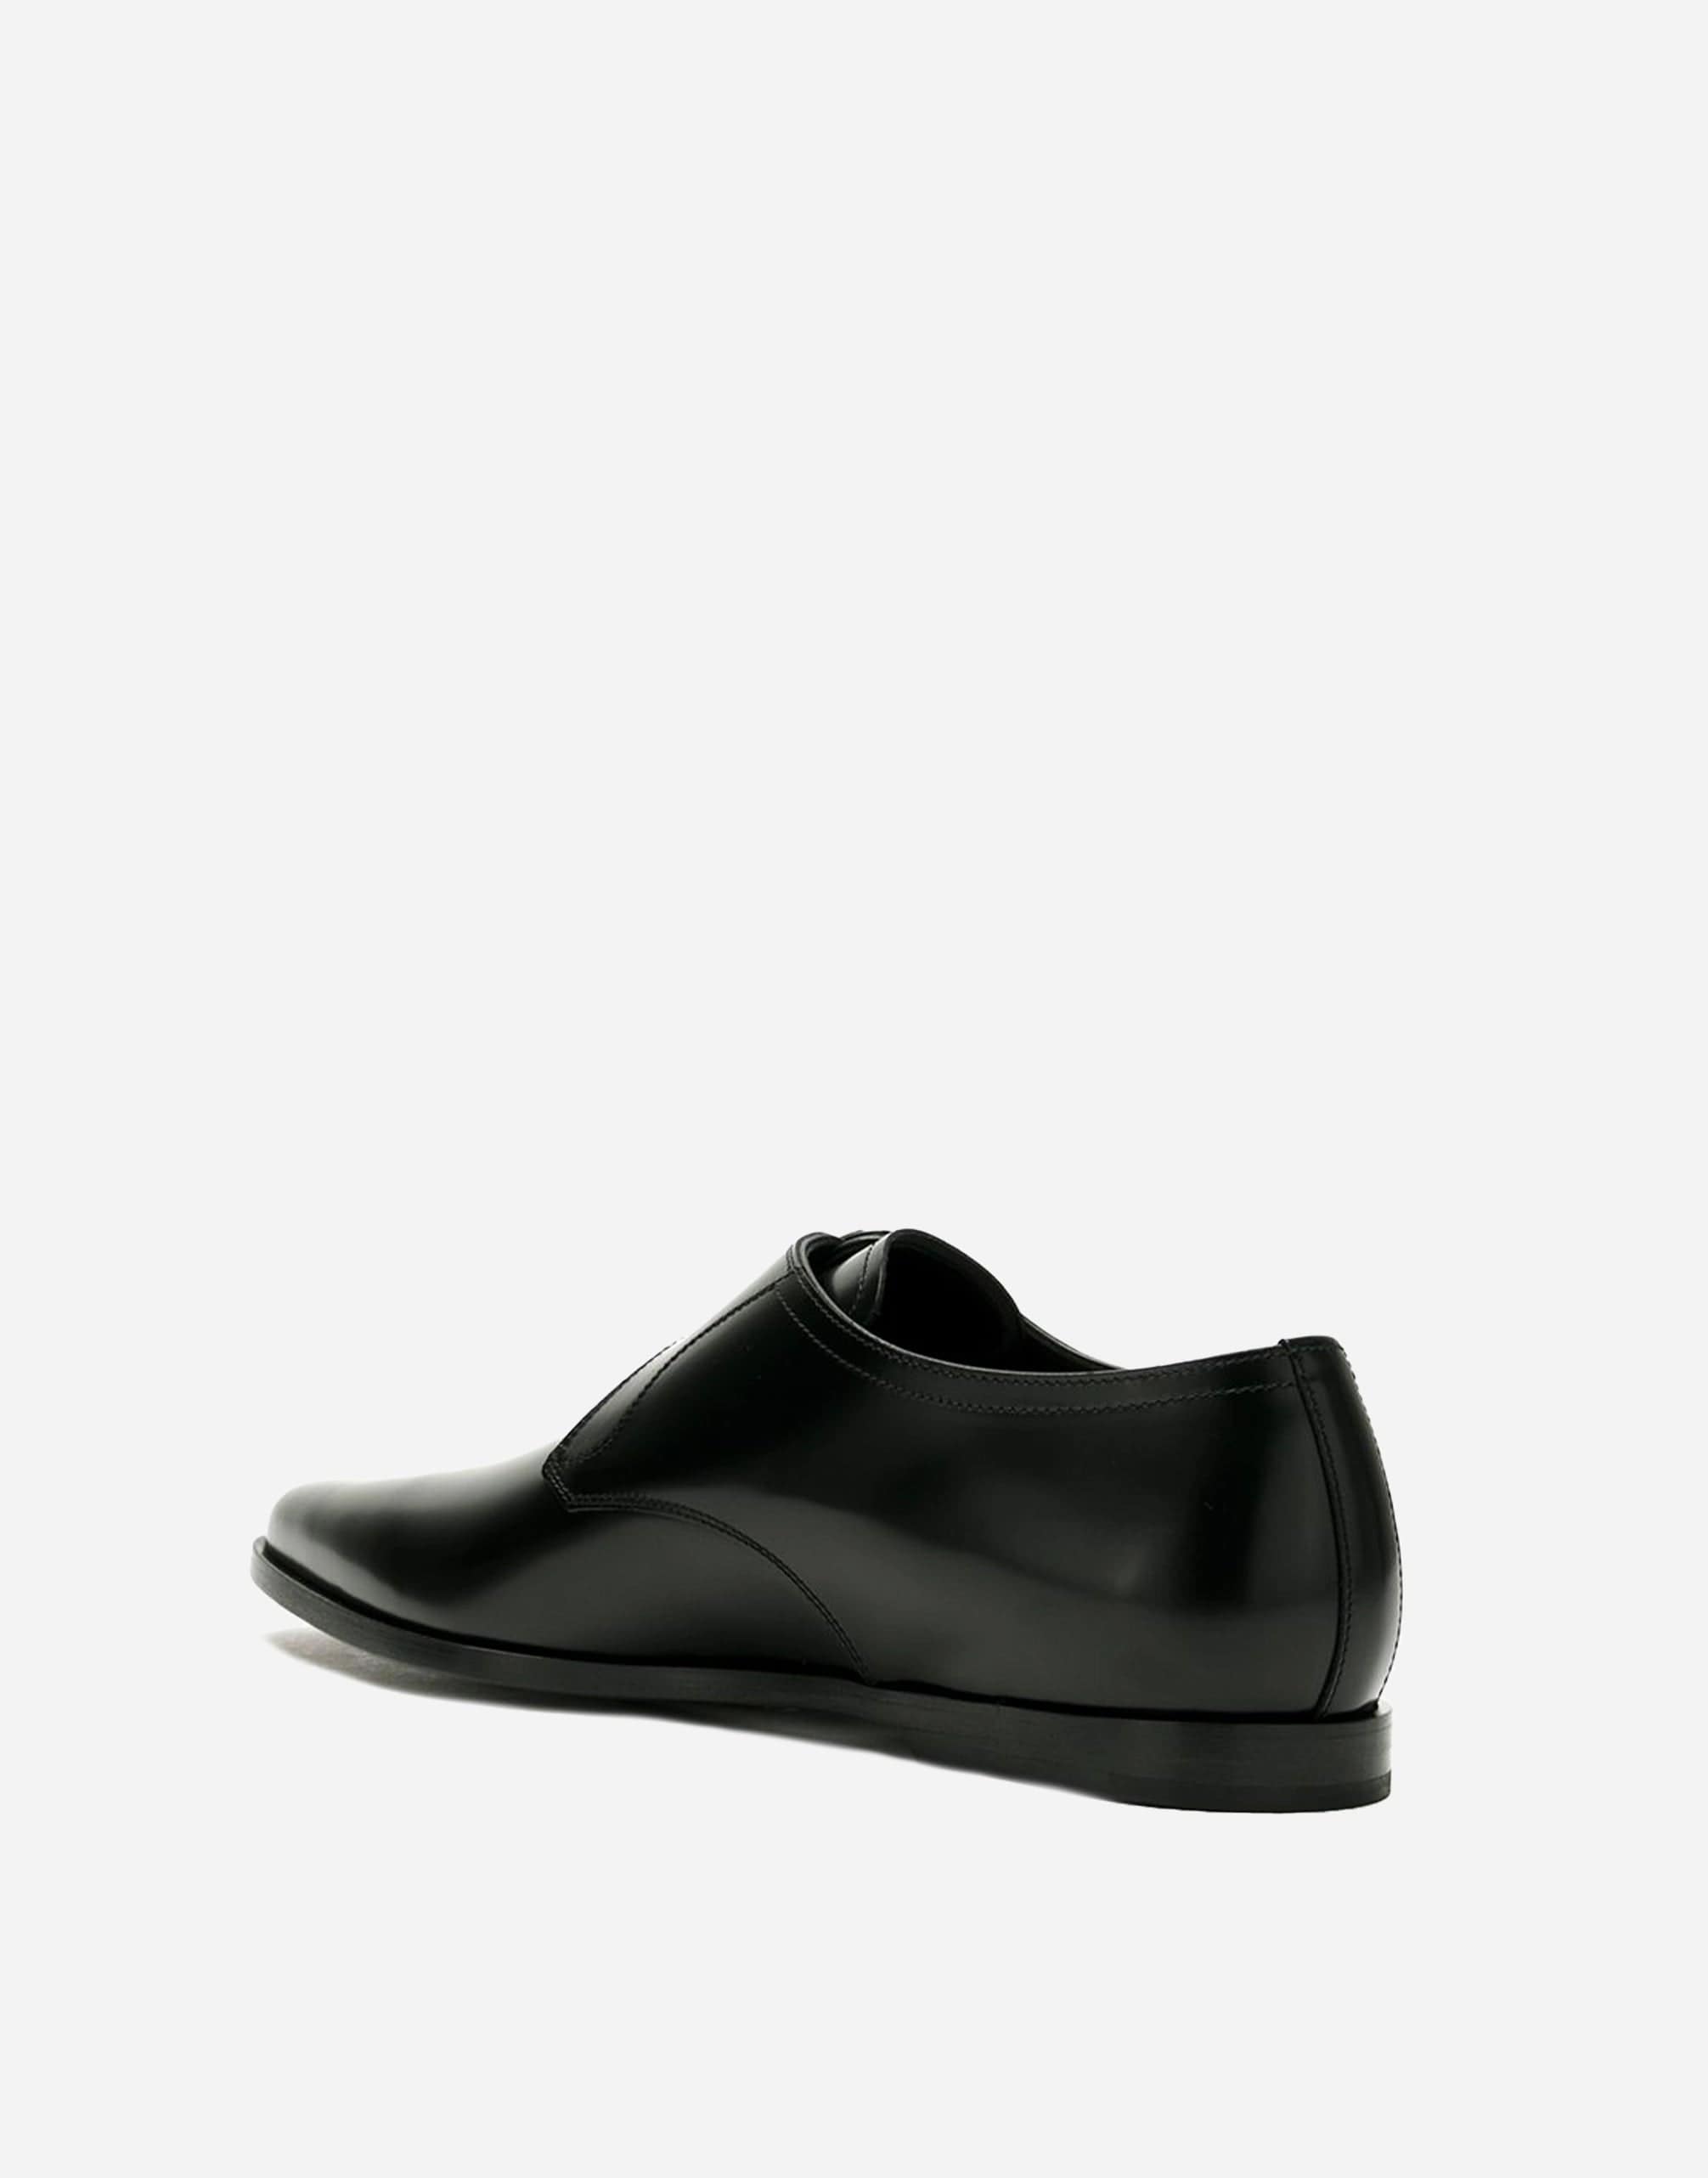 Dolce & Gabbana buckled monk shoes